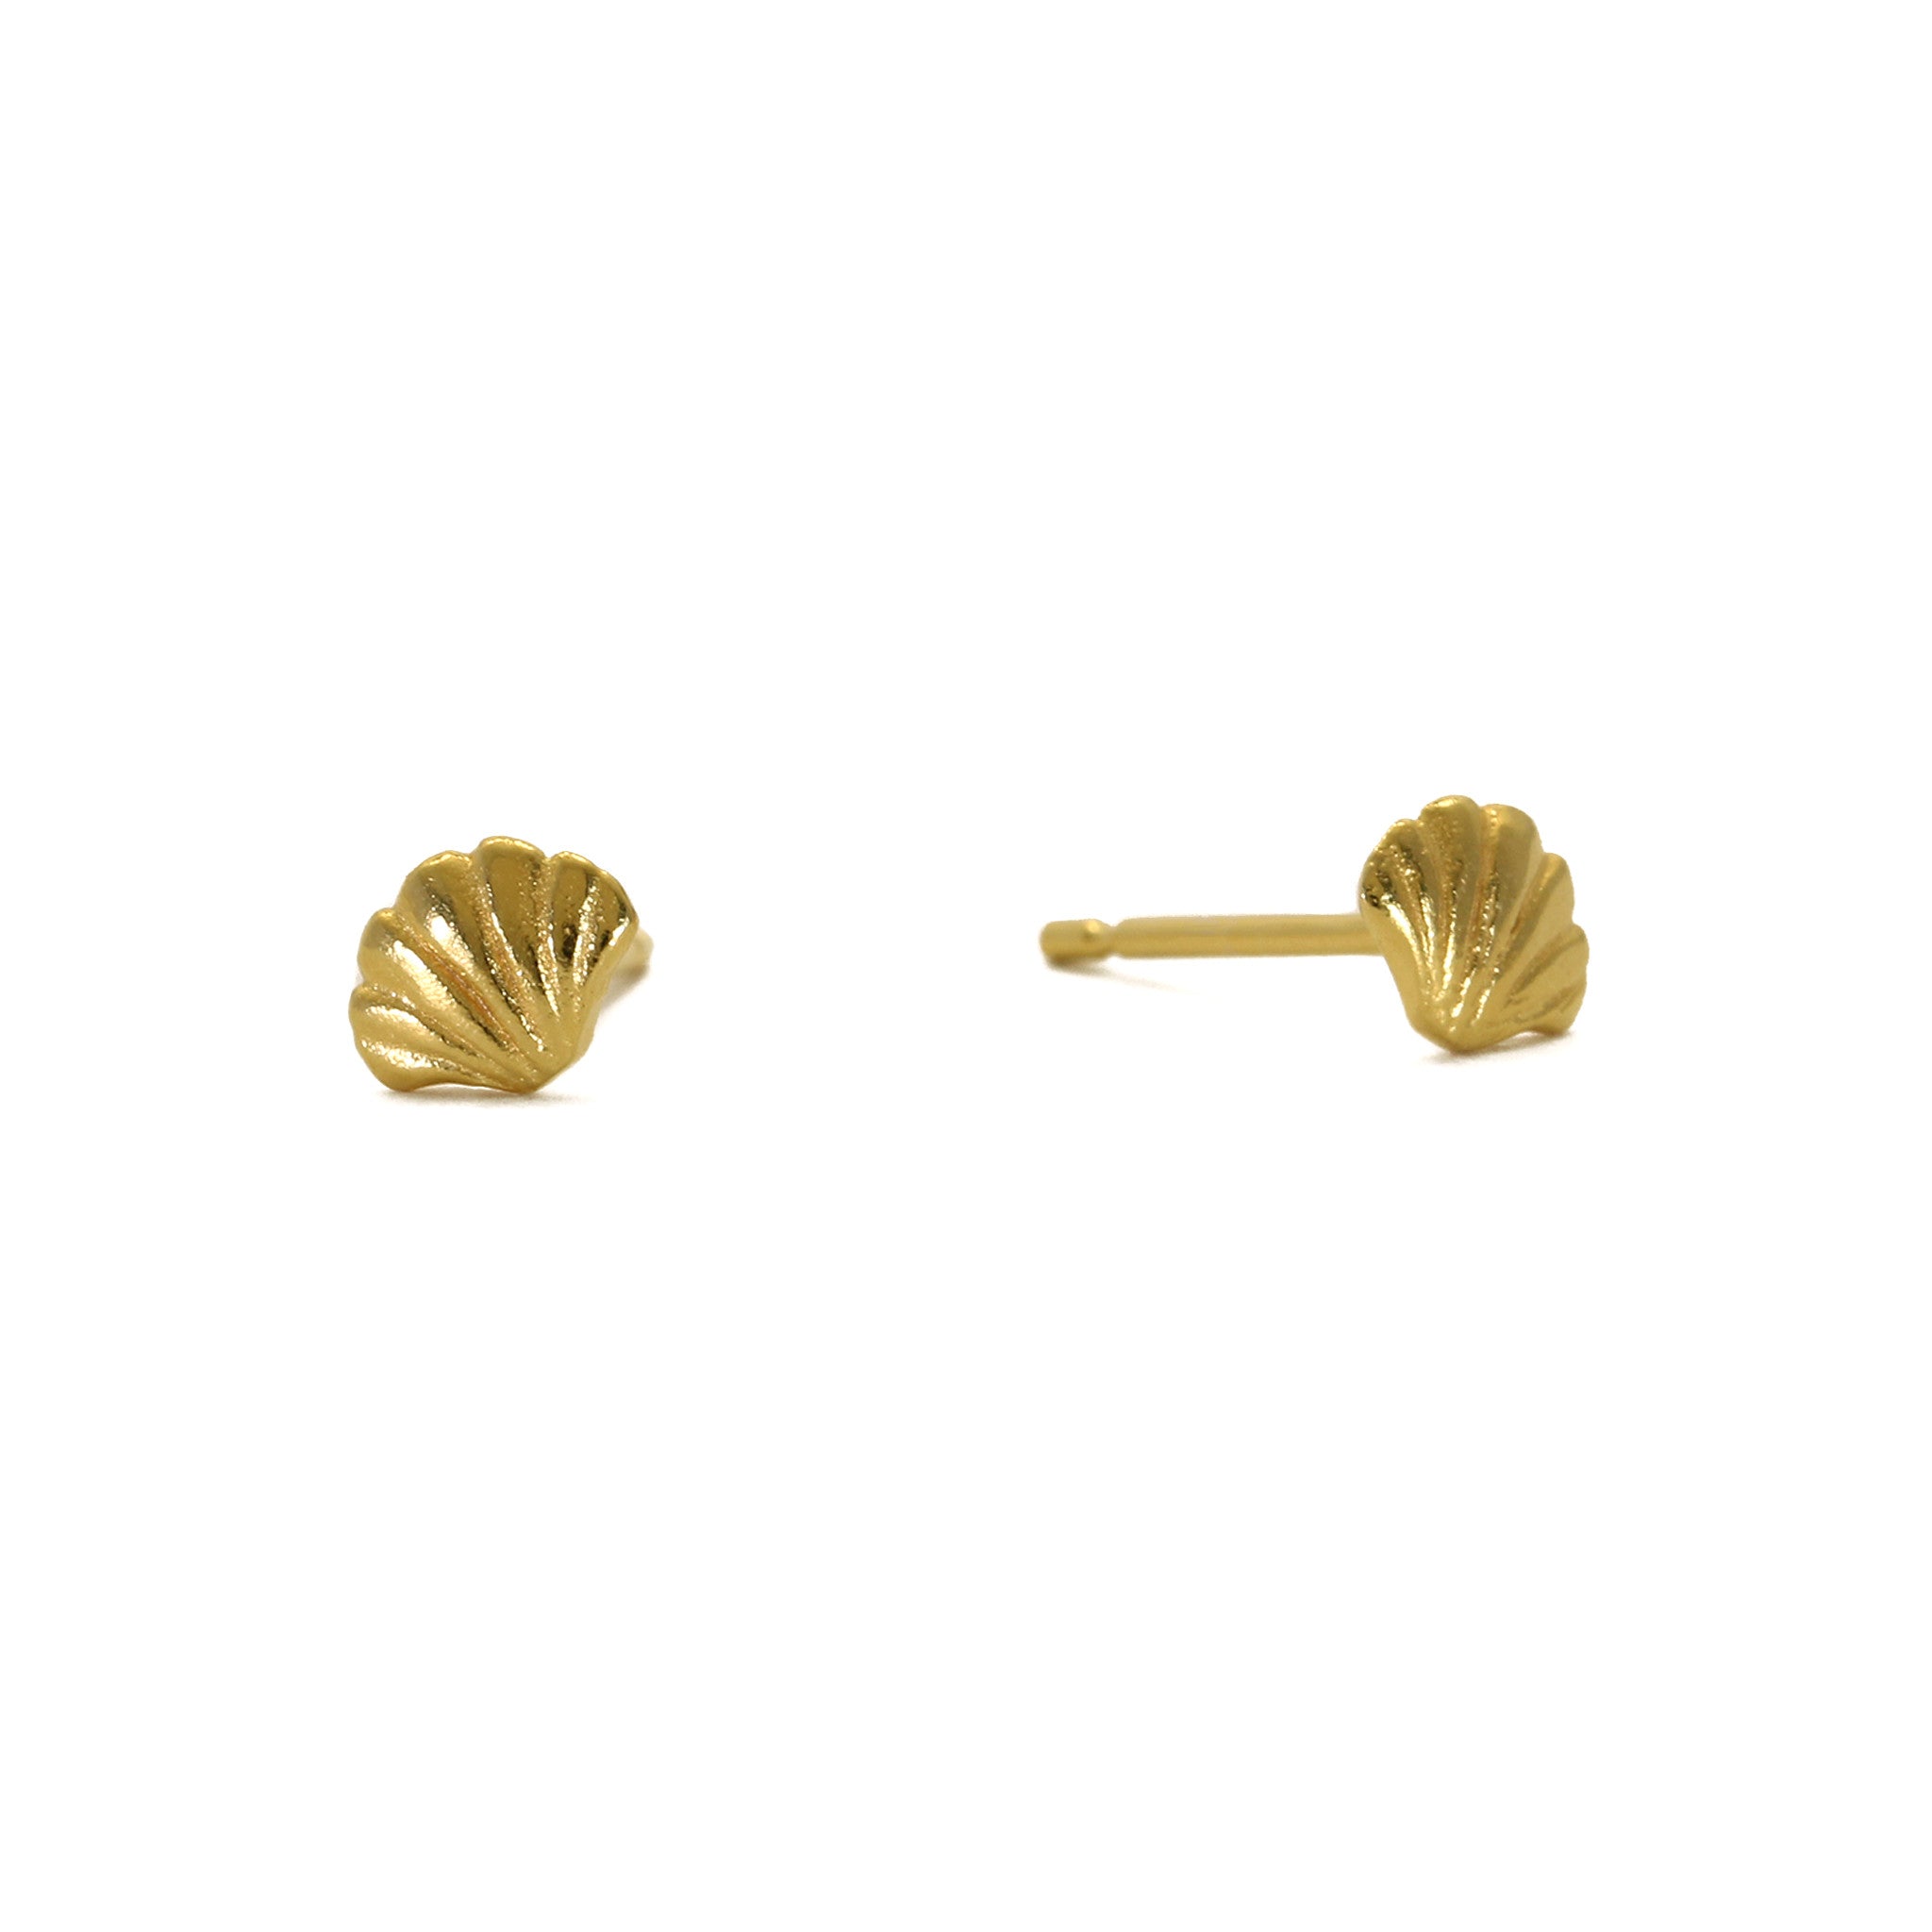 A pair of Tiny Wing Yellow Gold shell earrings